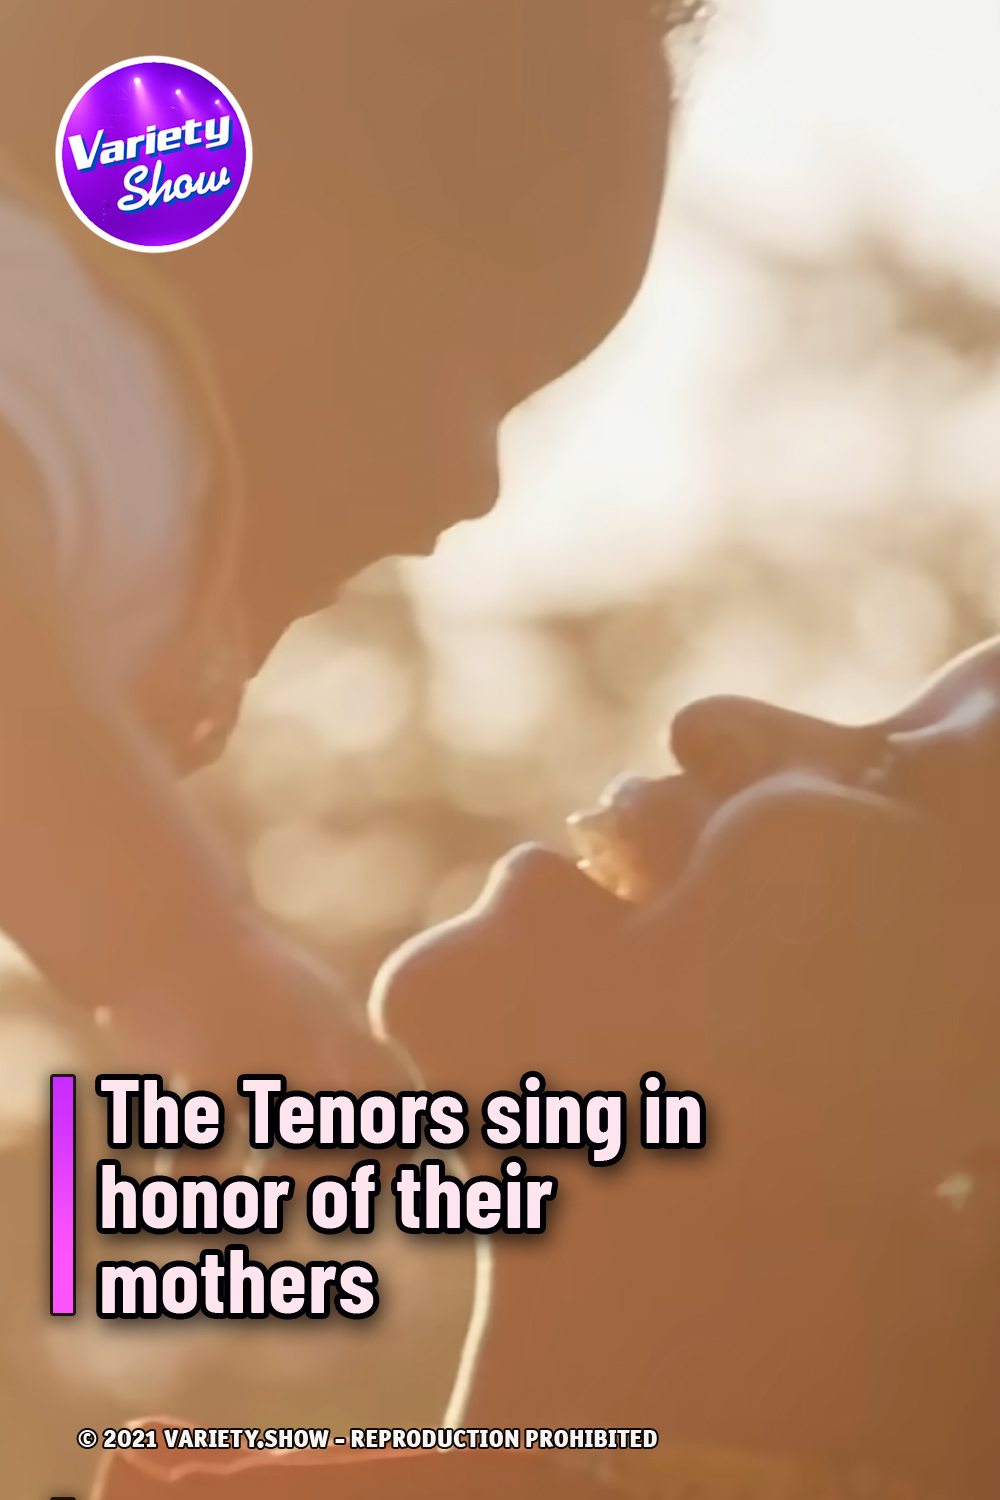 The Tenors sing in honor of their mothers